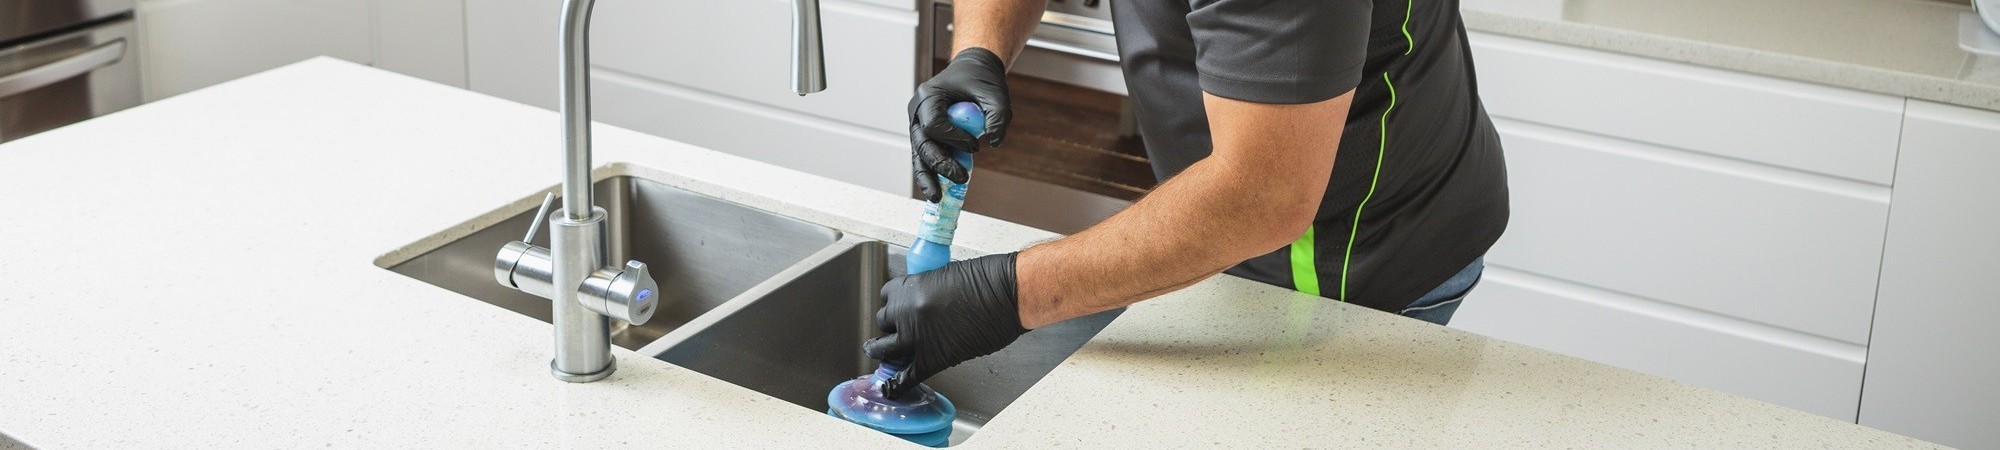 drain cleaning services in Newcastle